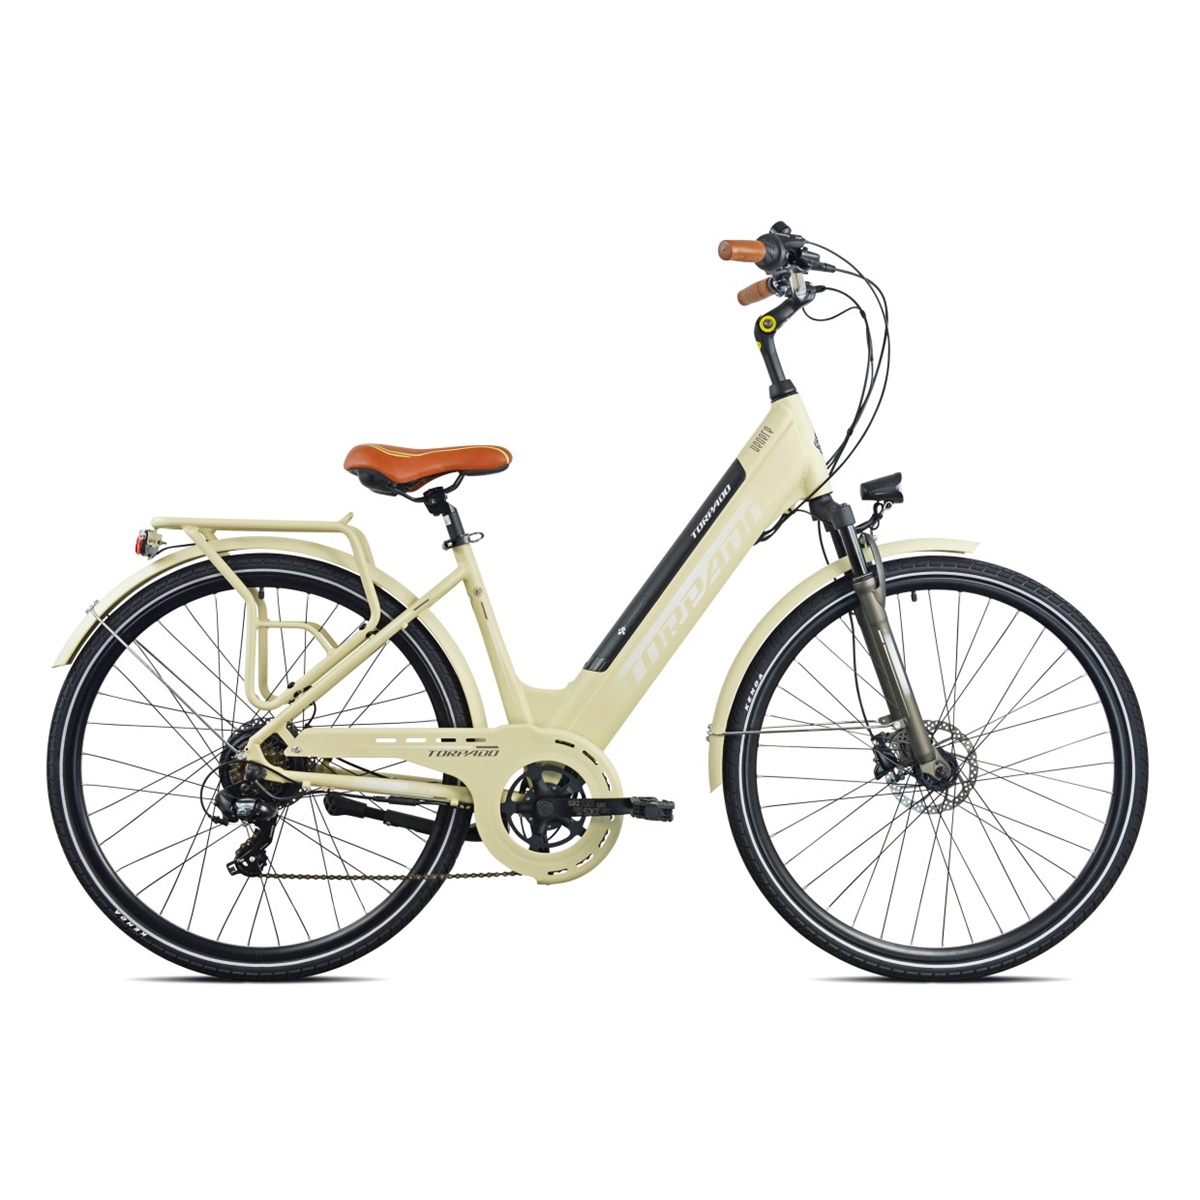 Venere T268 28'' 7s 468Wh Bafang White Cream One Size